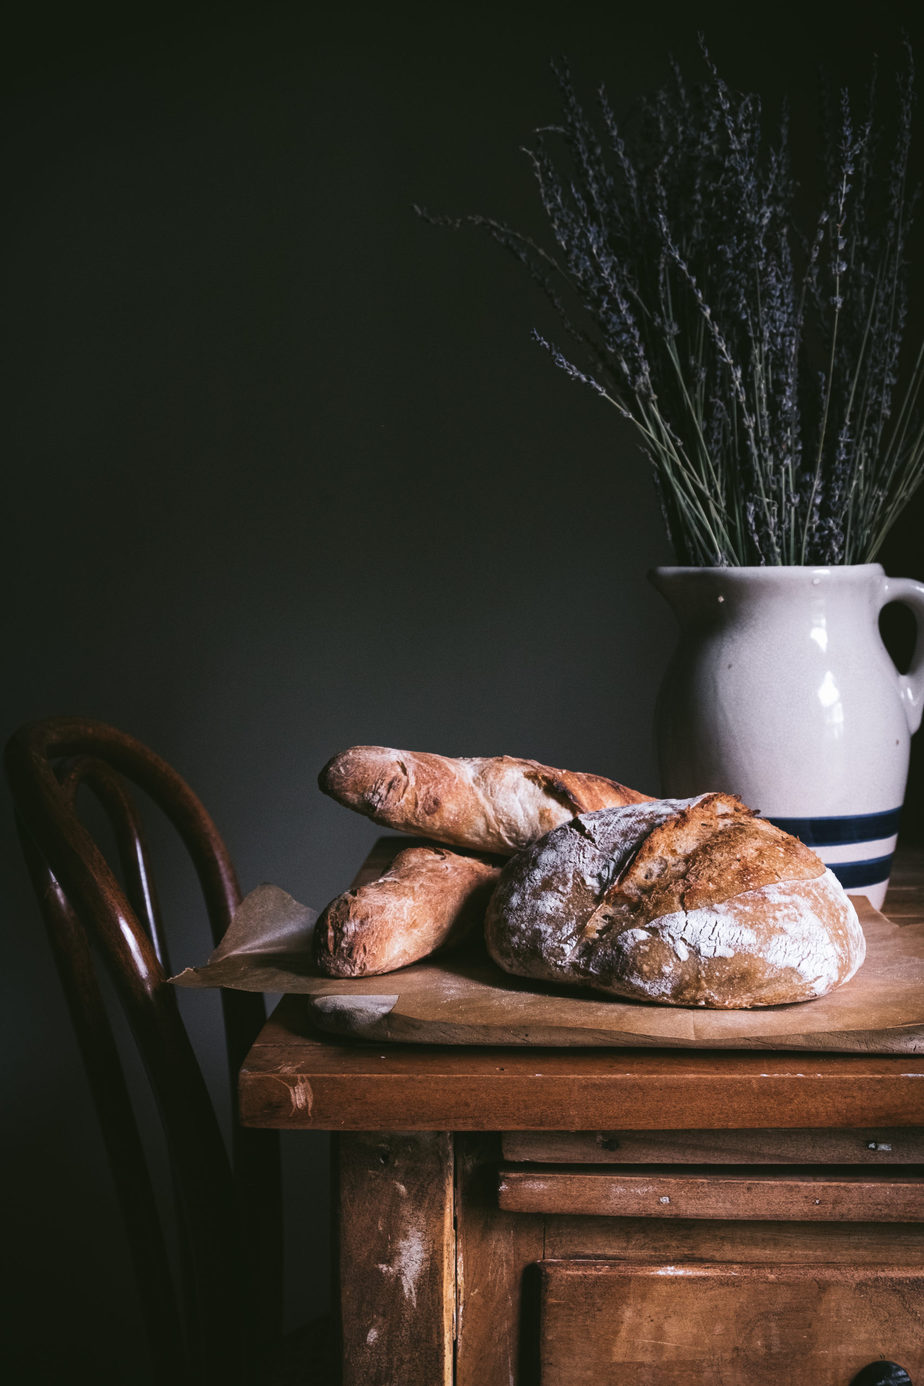 Country Sourdough & Baguettes | The Edgewood Baker